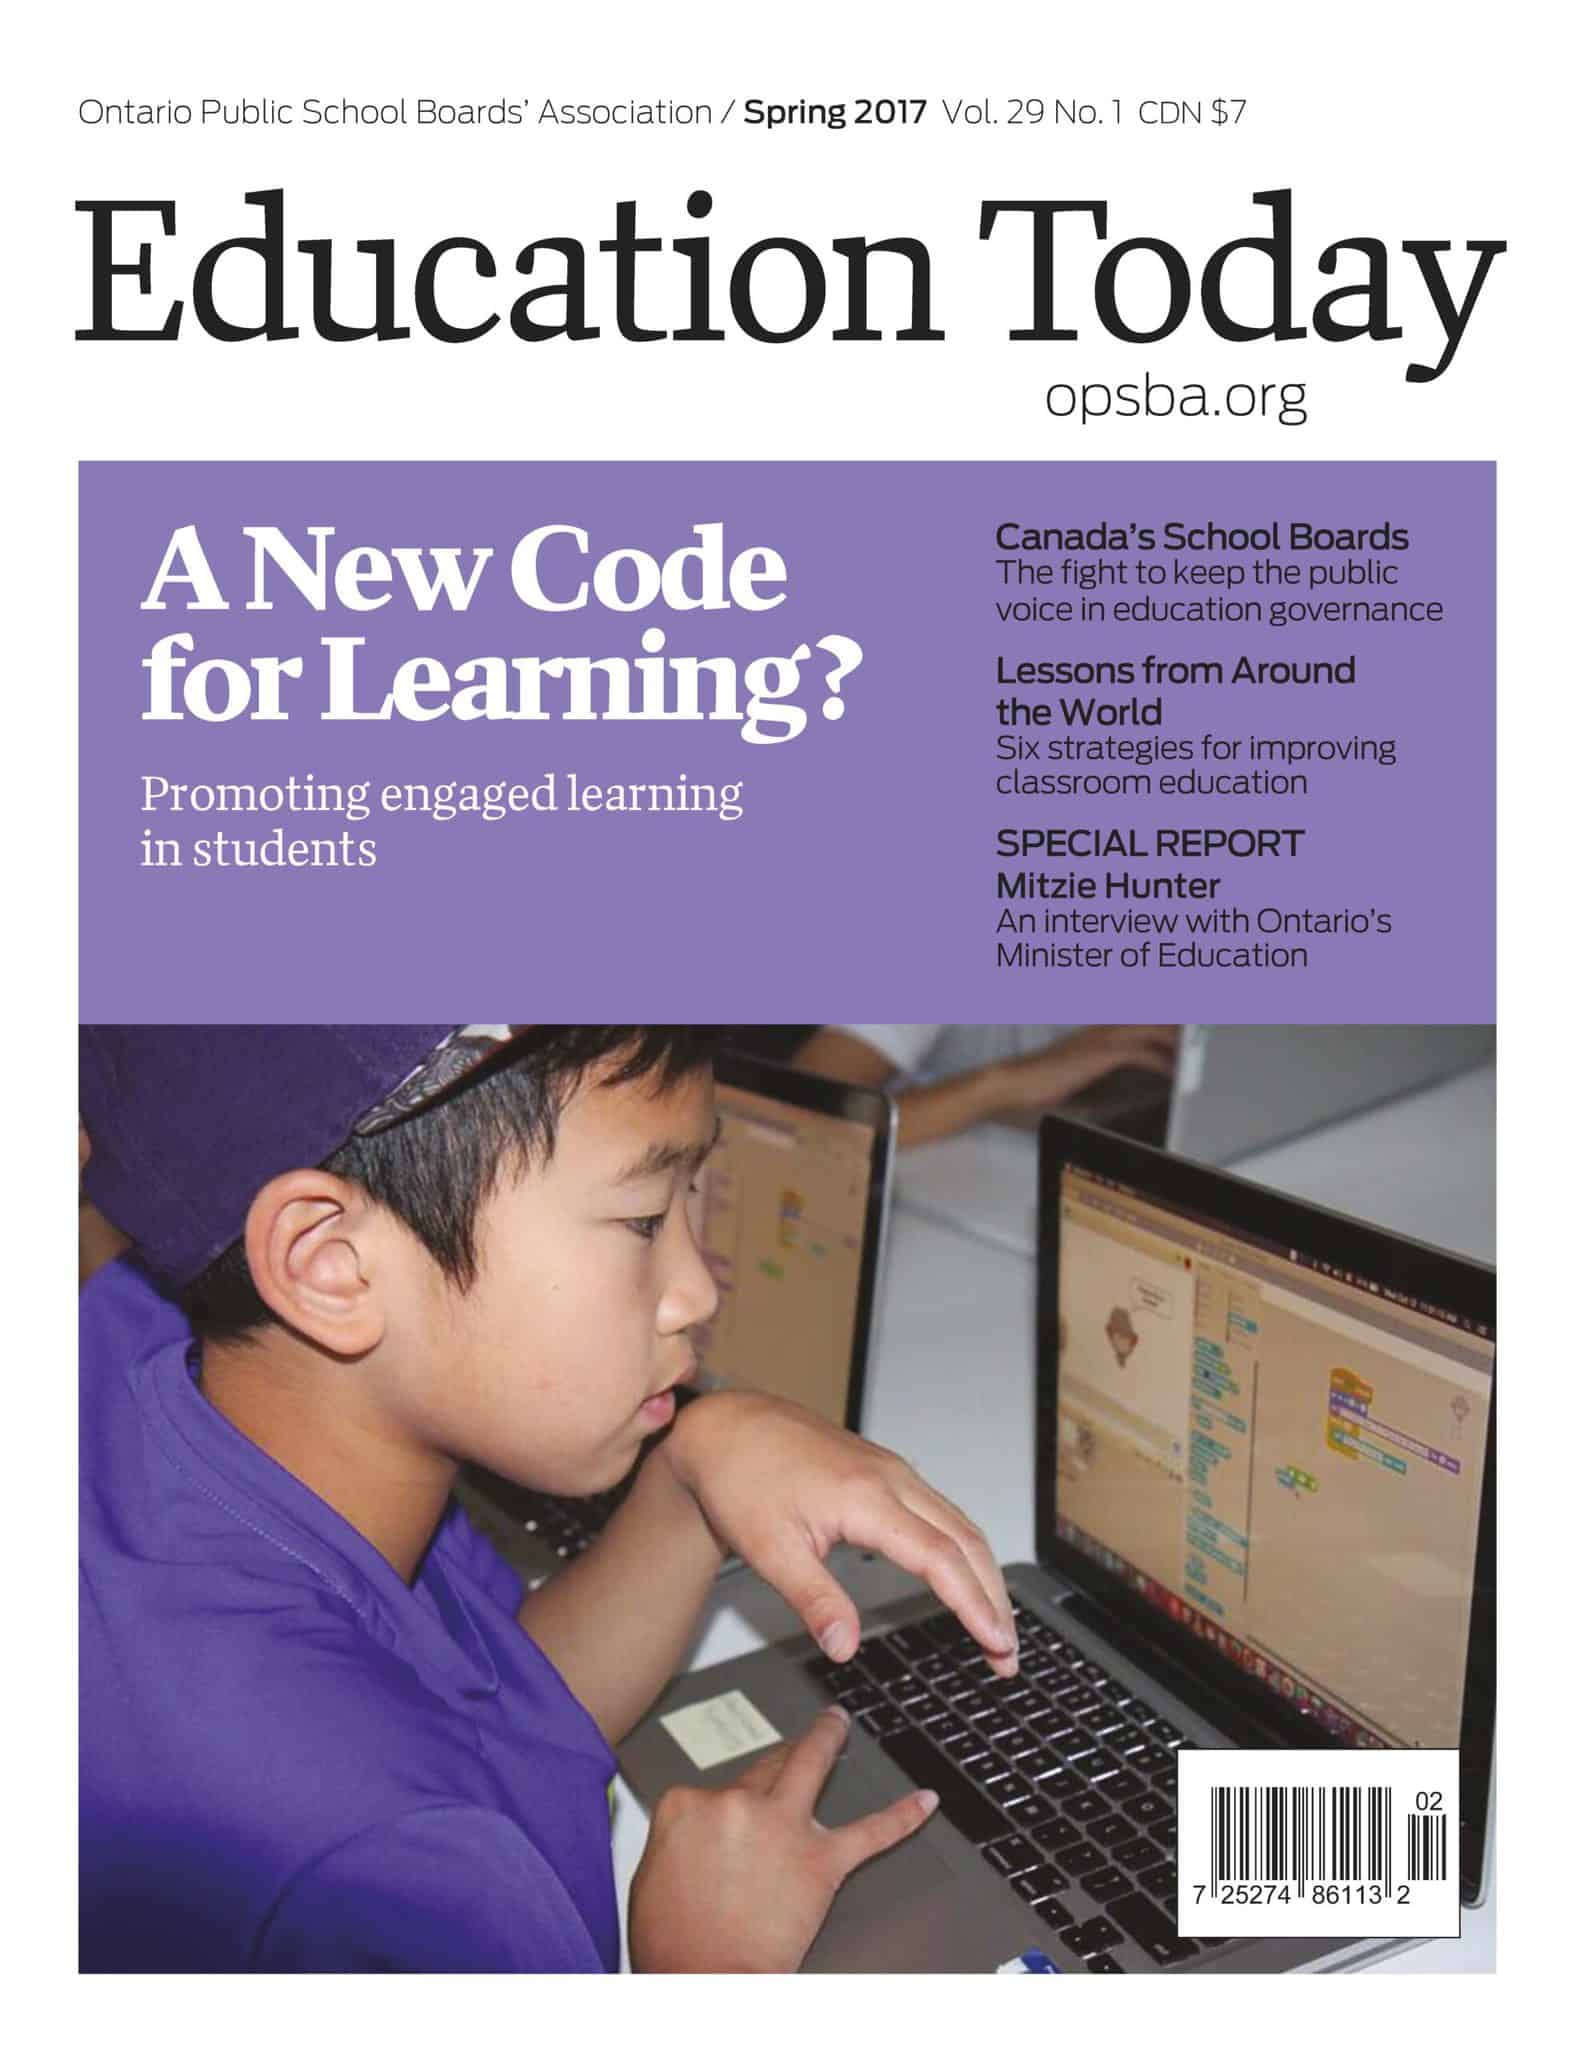 Education Today | Spring 2017 | Volume 29 Number 1